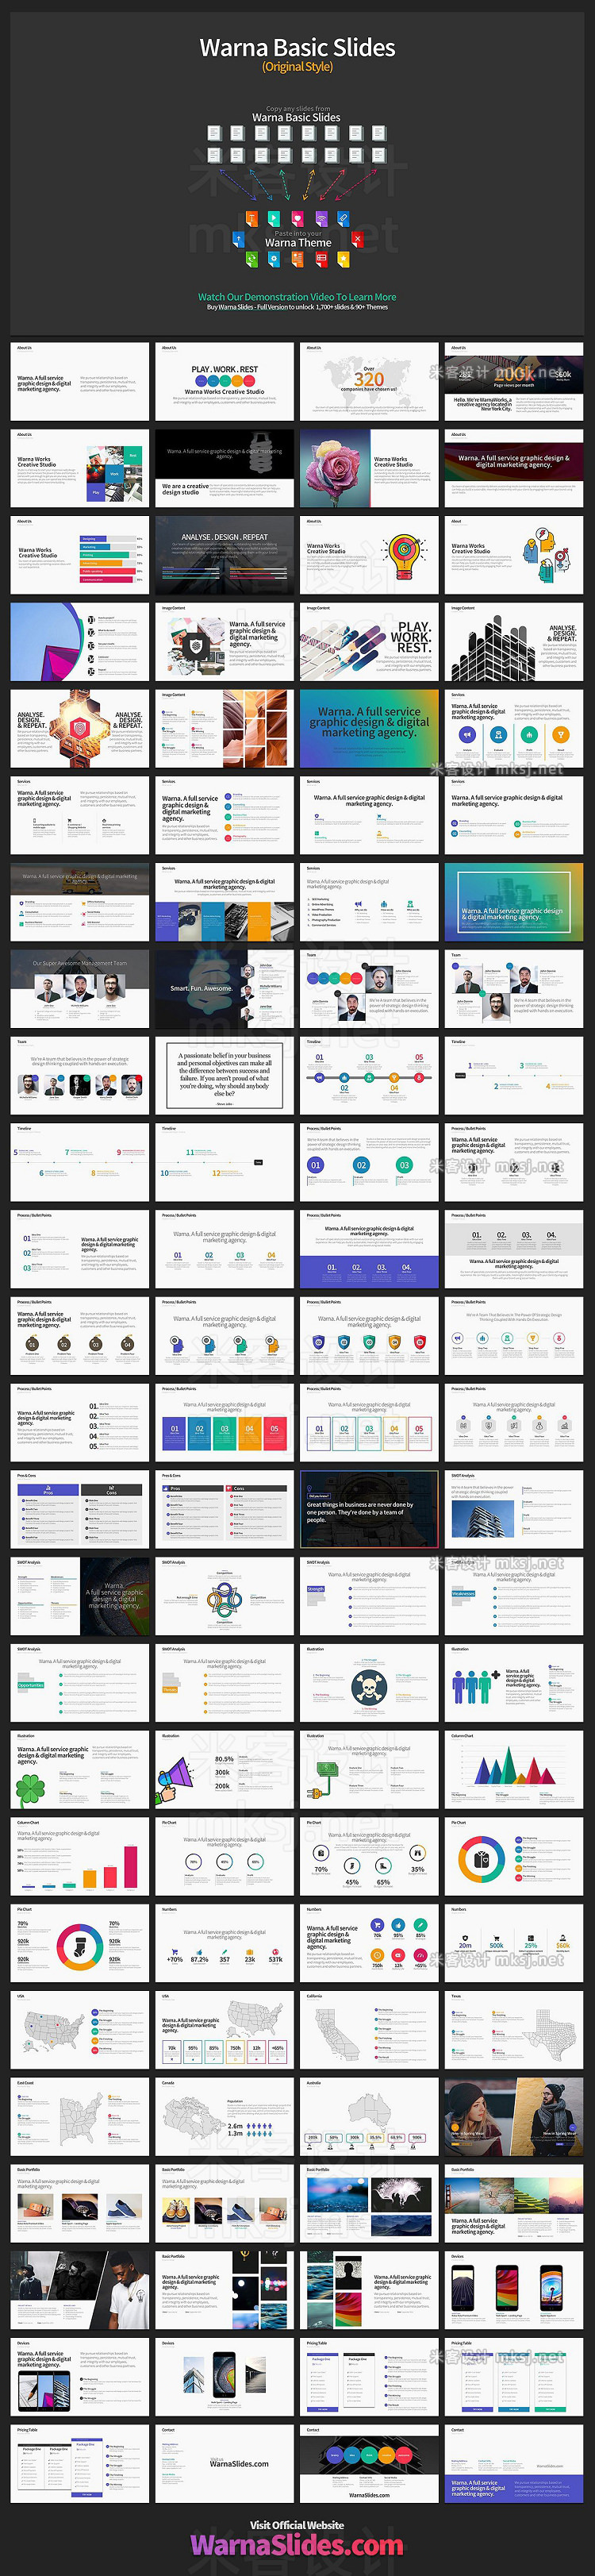 PPT模板 Simpler PowerPoint Template